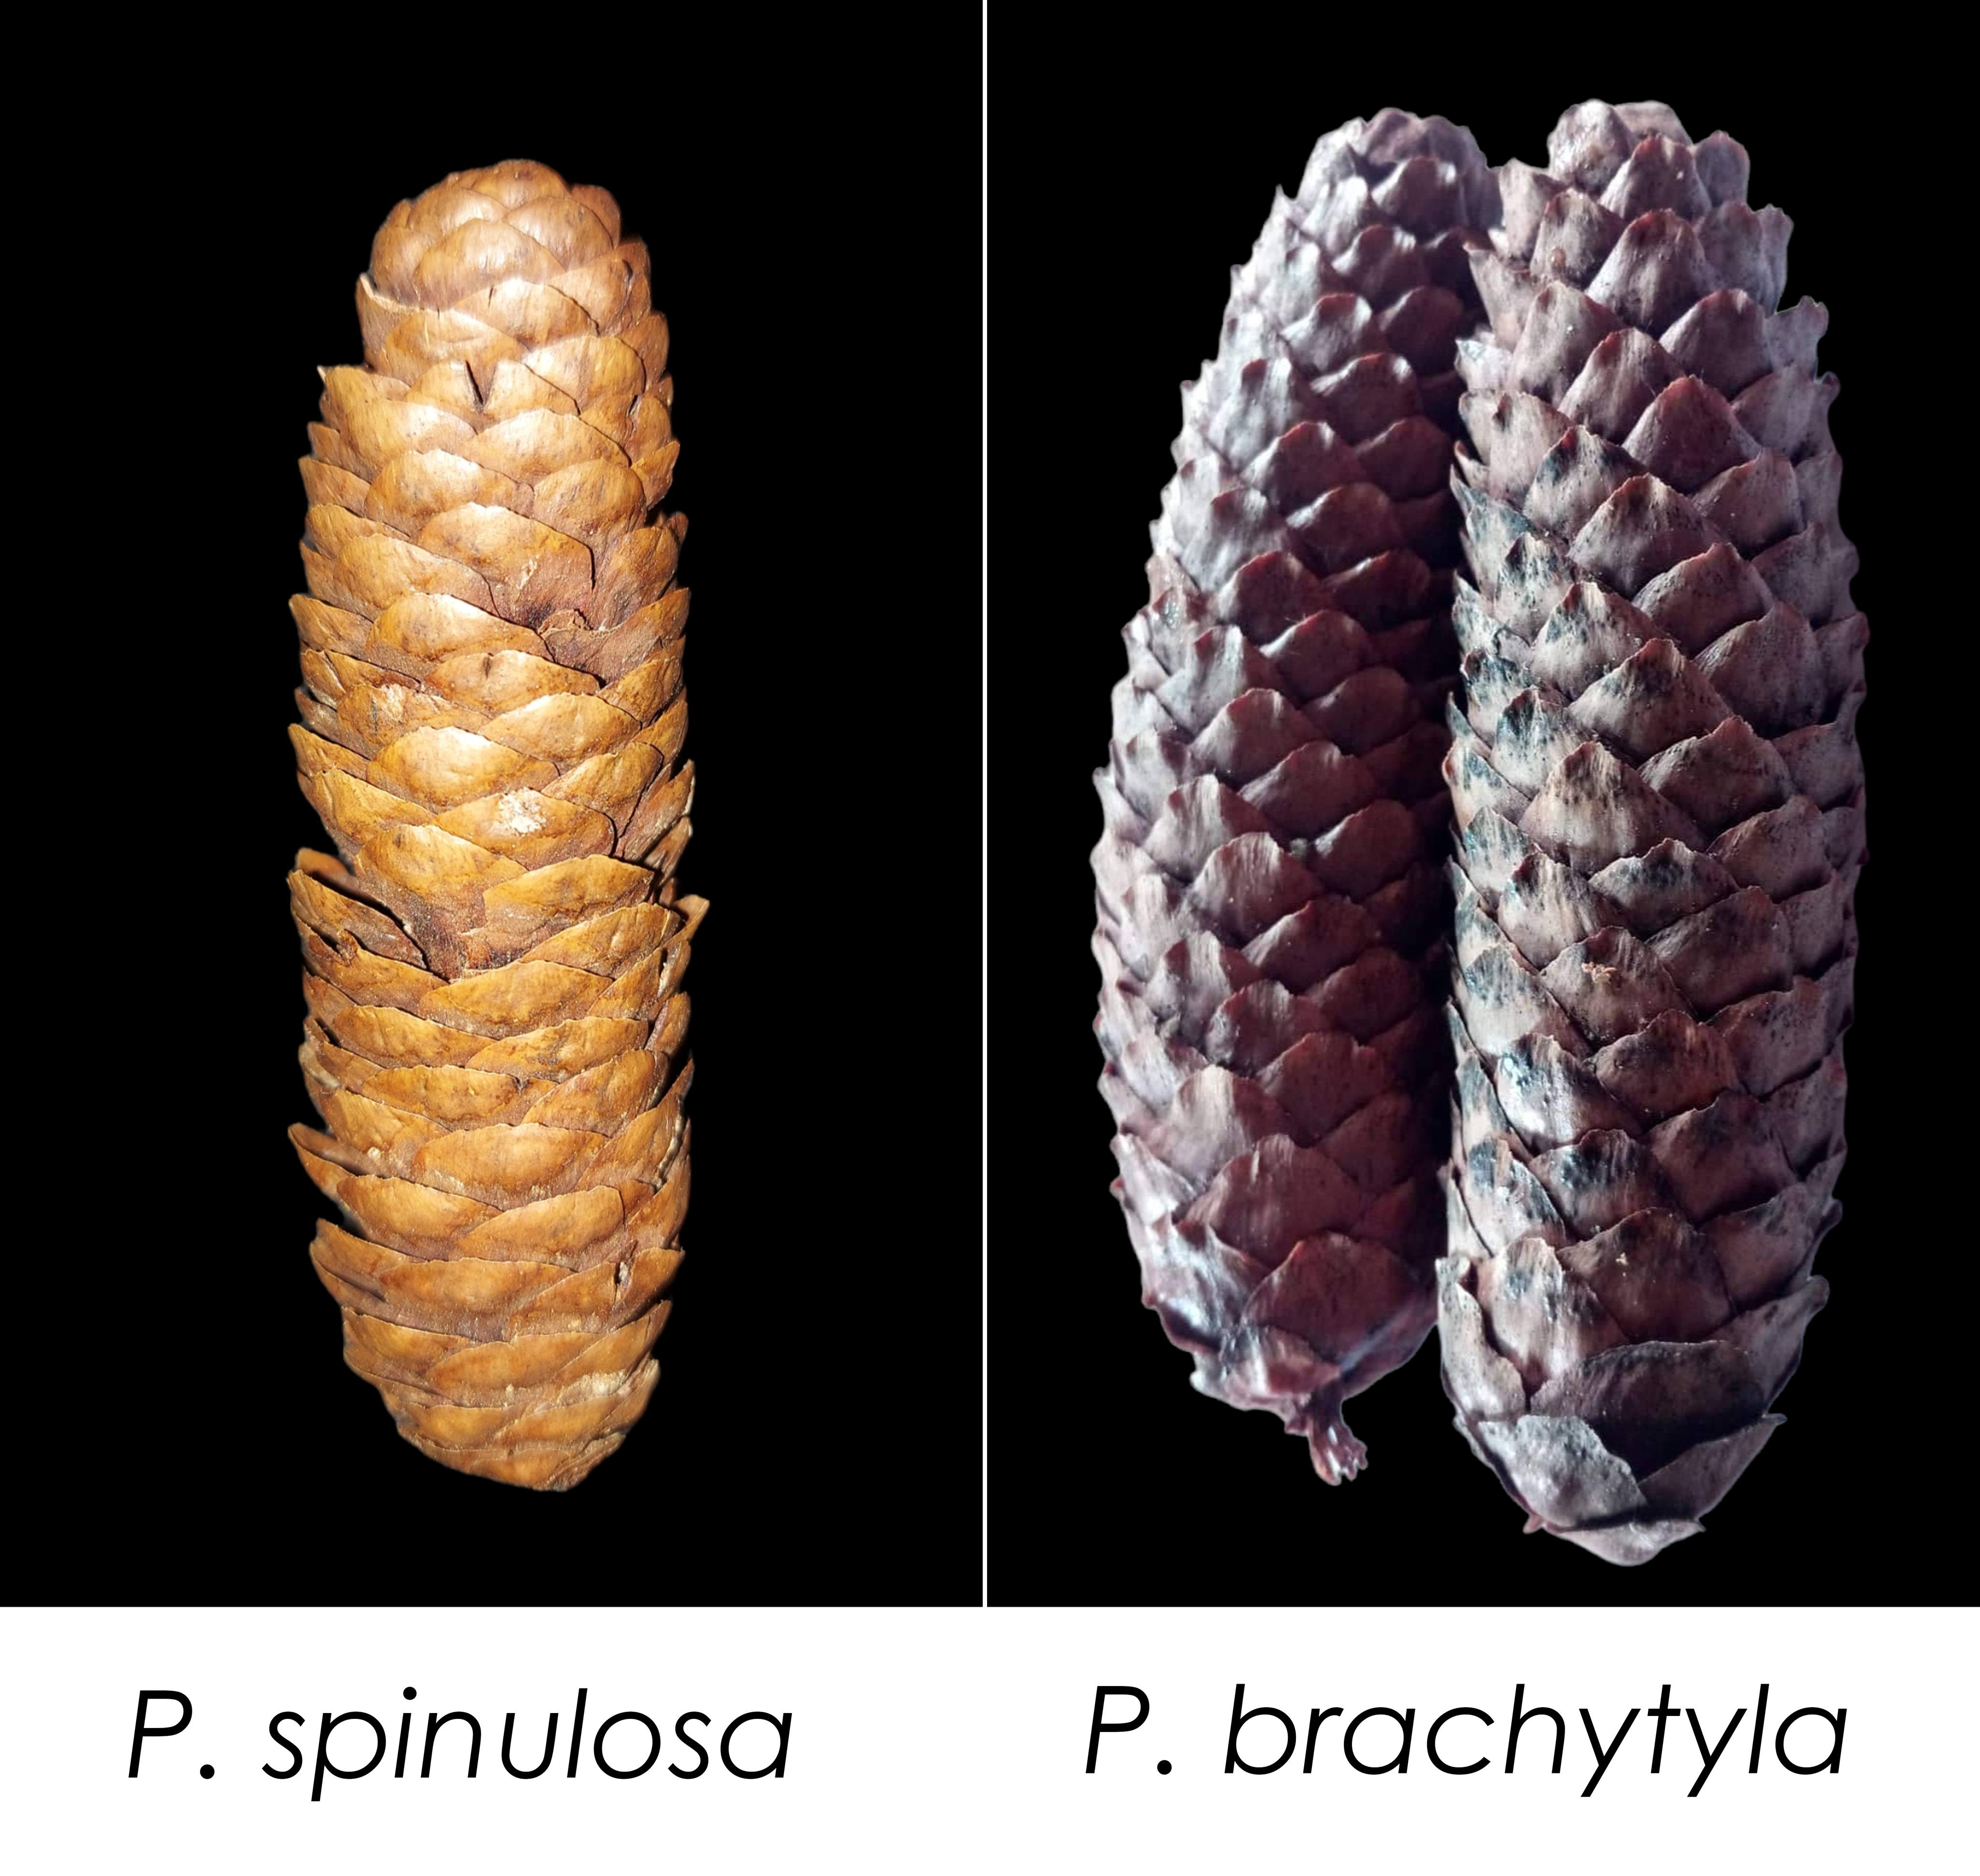 Cones of the two species of Picea found in Bhutan